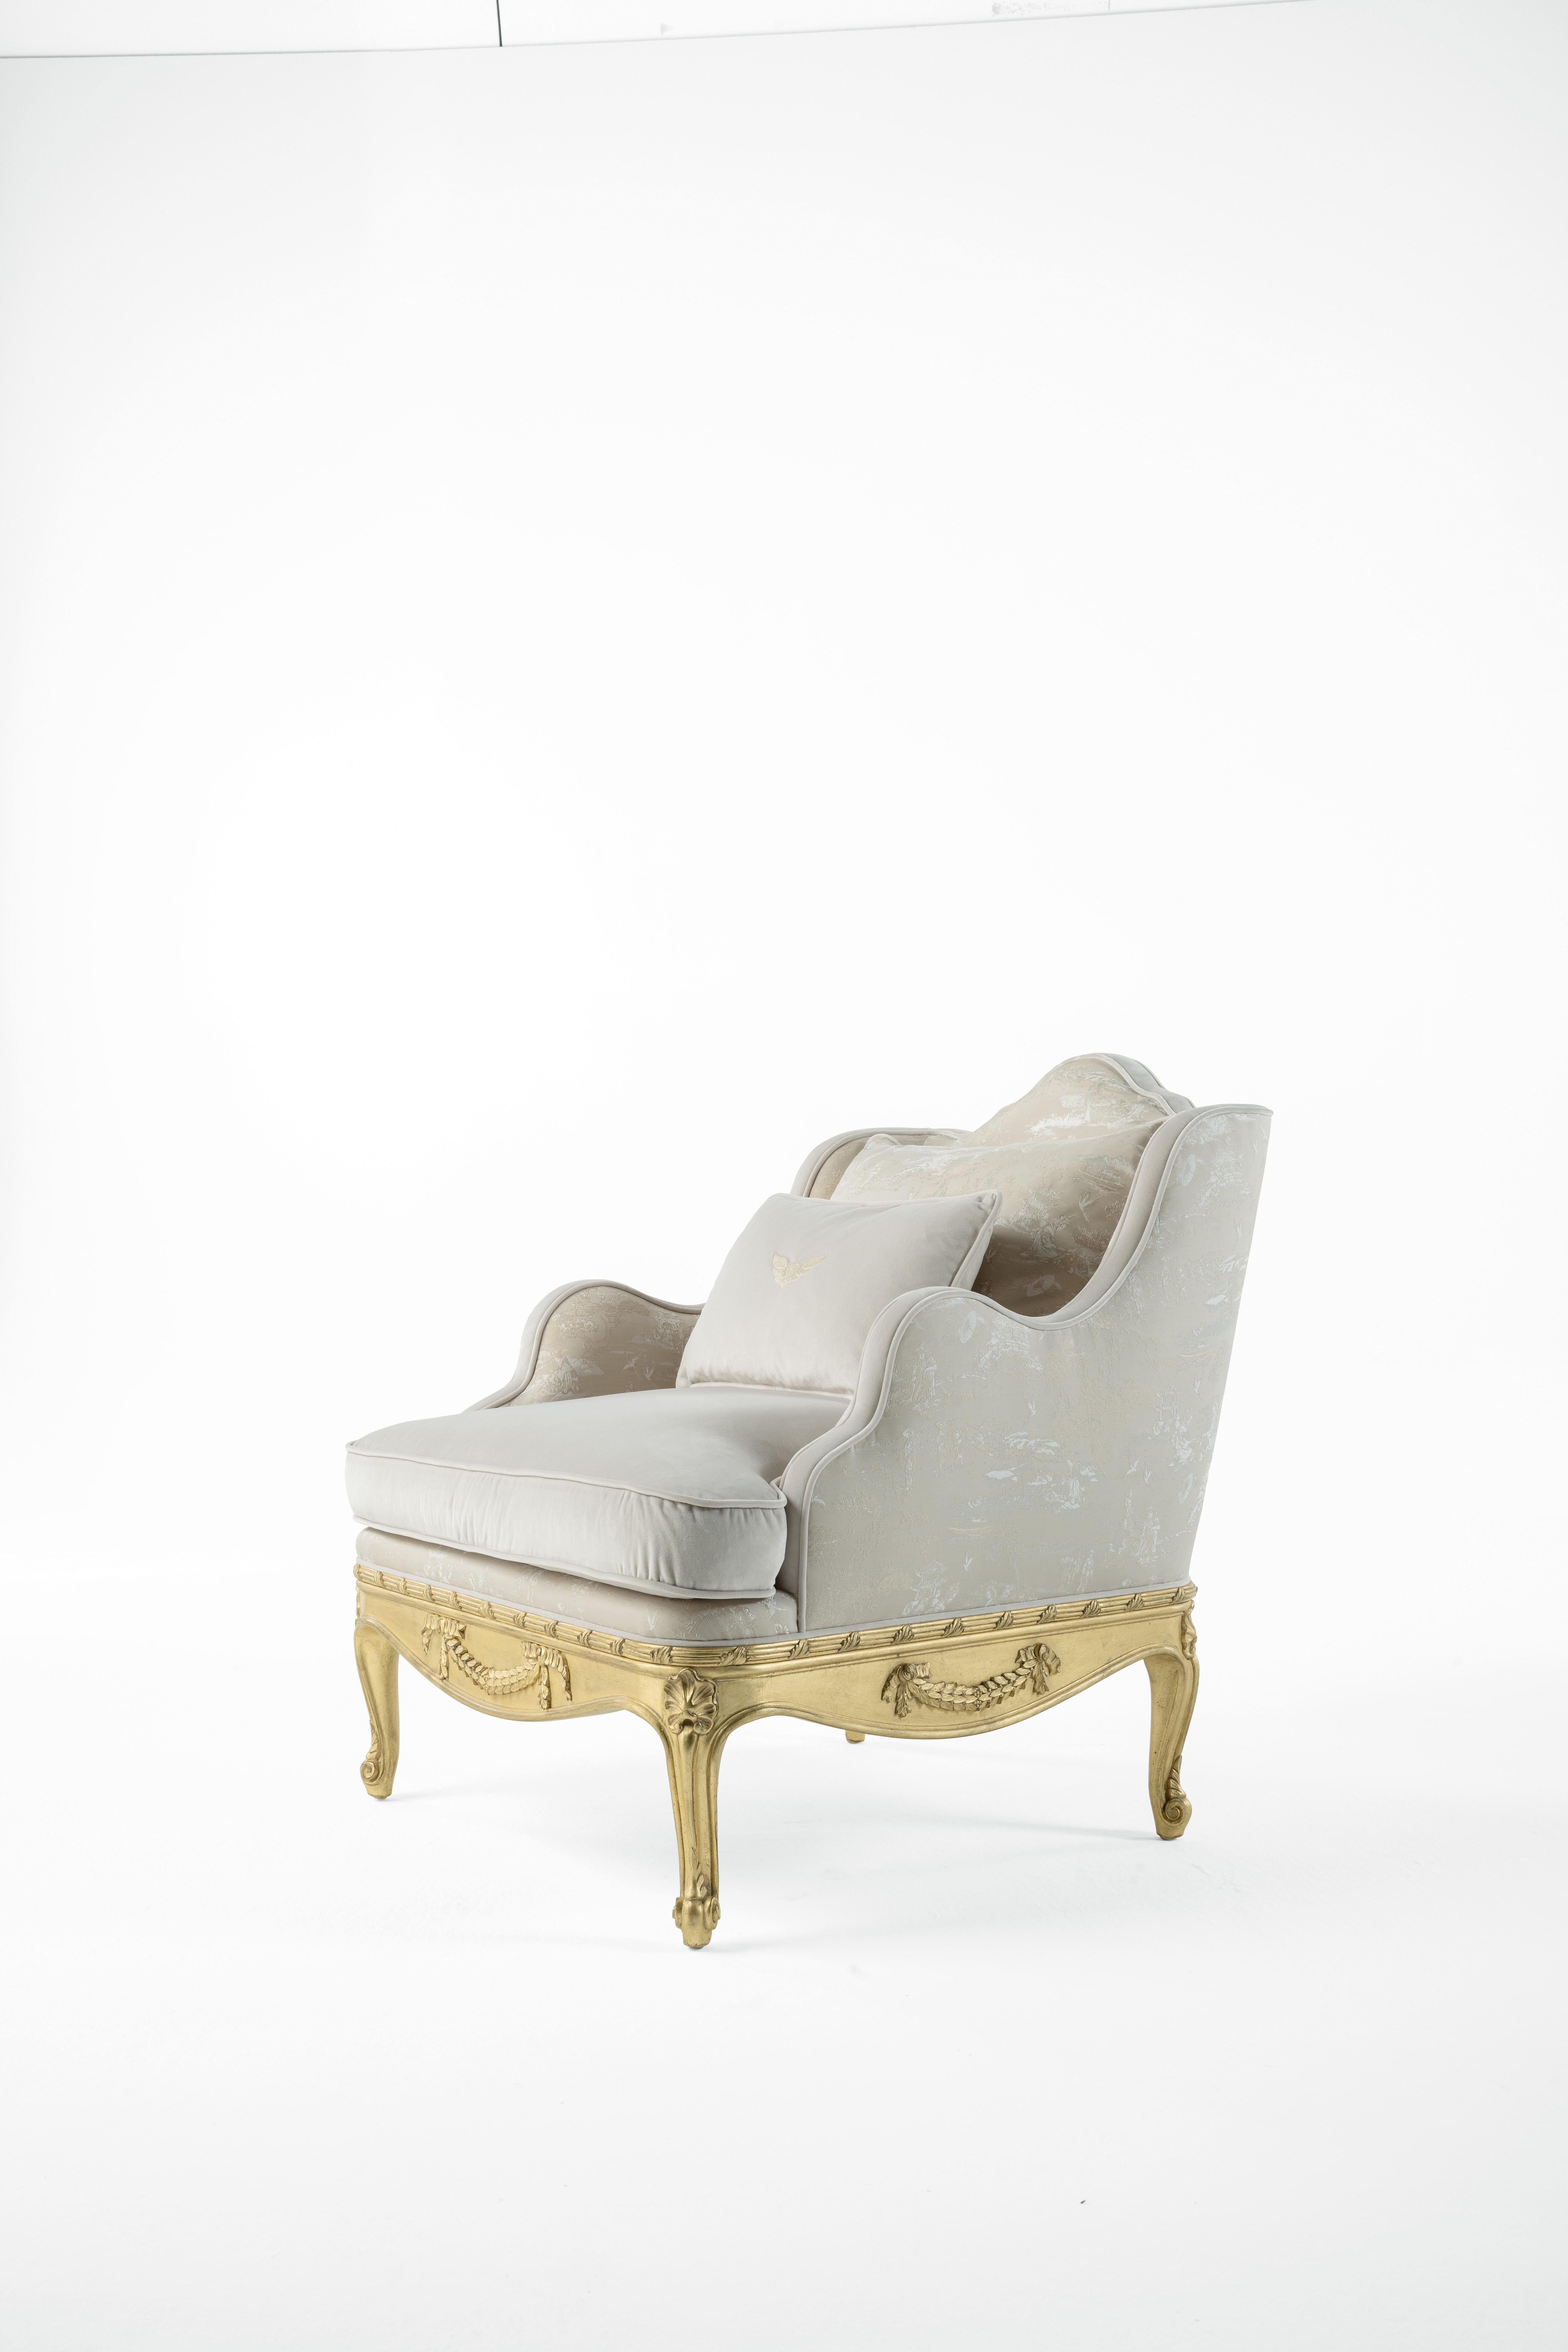 Seductive lines and precious details for the Eglantine collection. Its soft and welcoming shapes are embellished by a hand-carved profile with gold leaf finishing. The perfect furniture for a luxurious and elegant setting, with a timeless